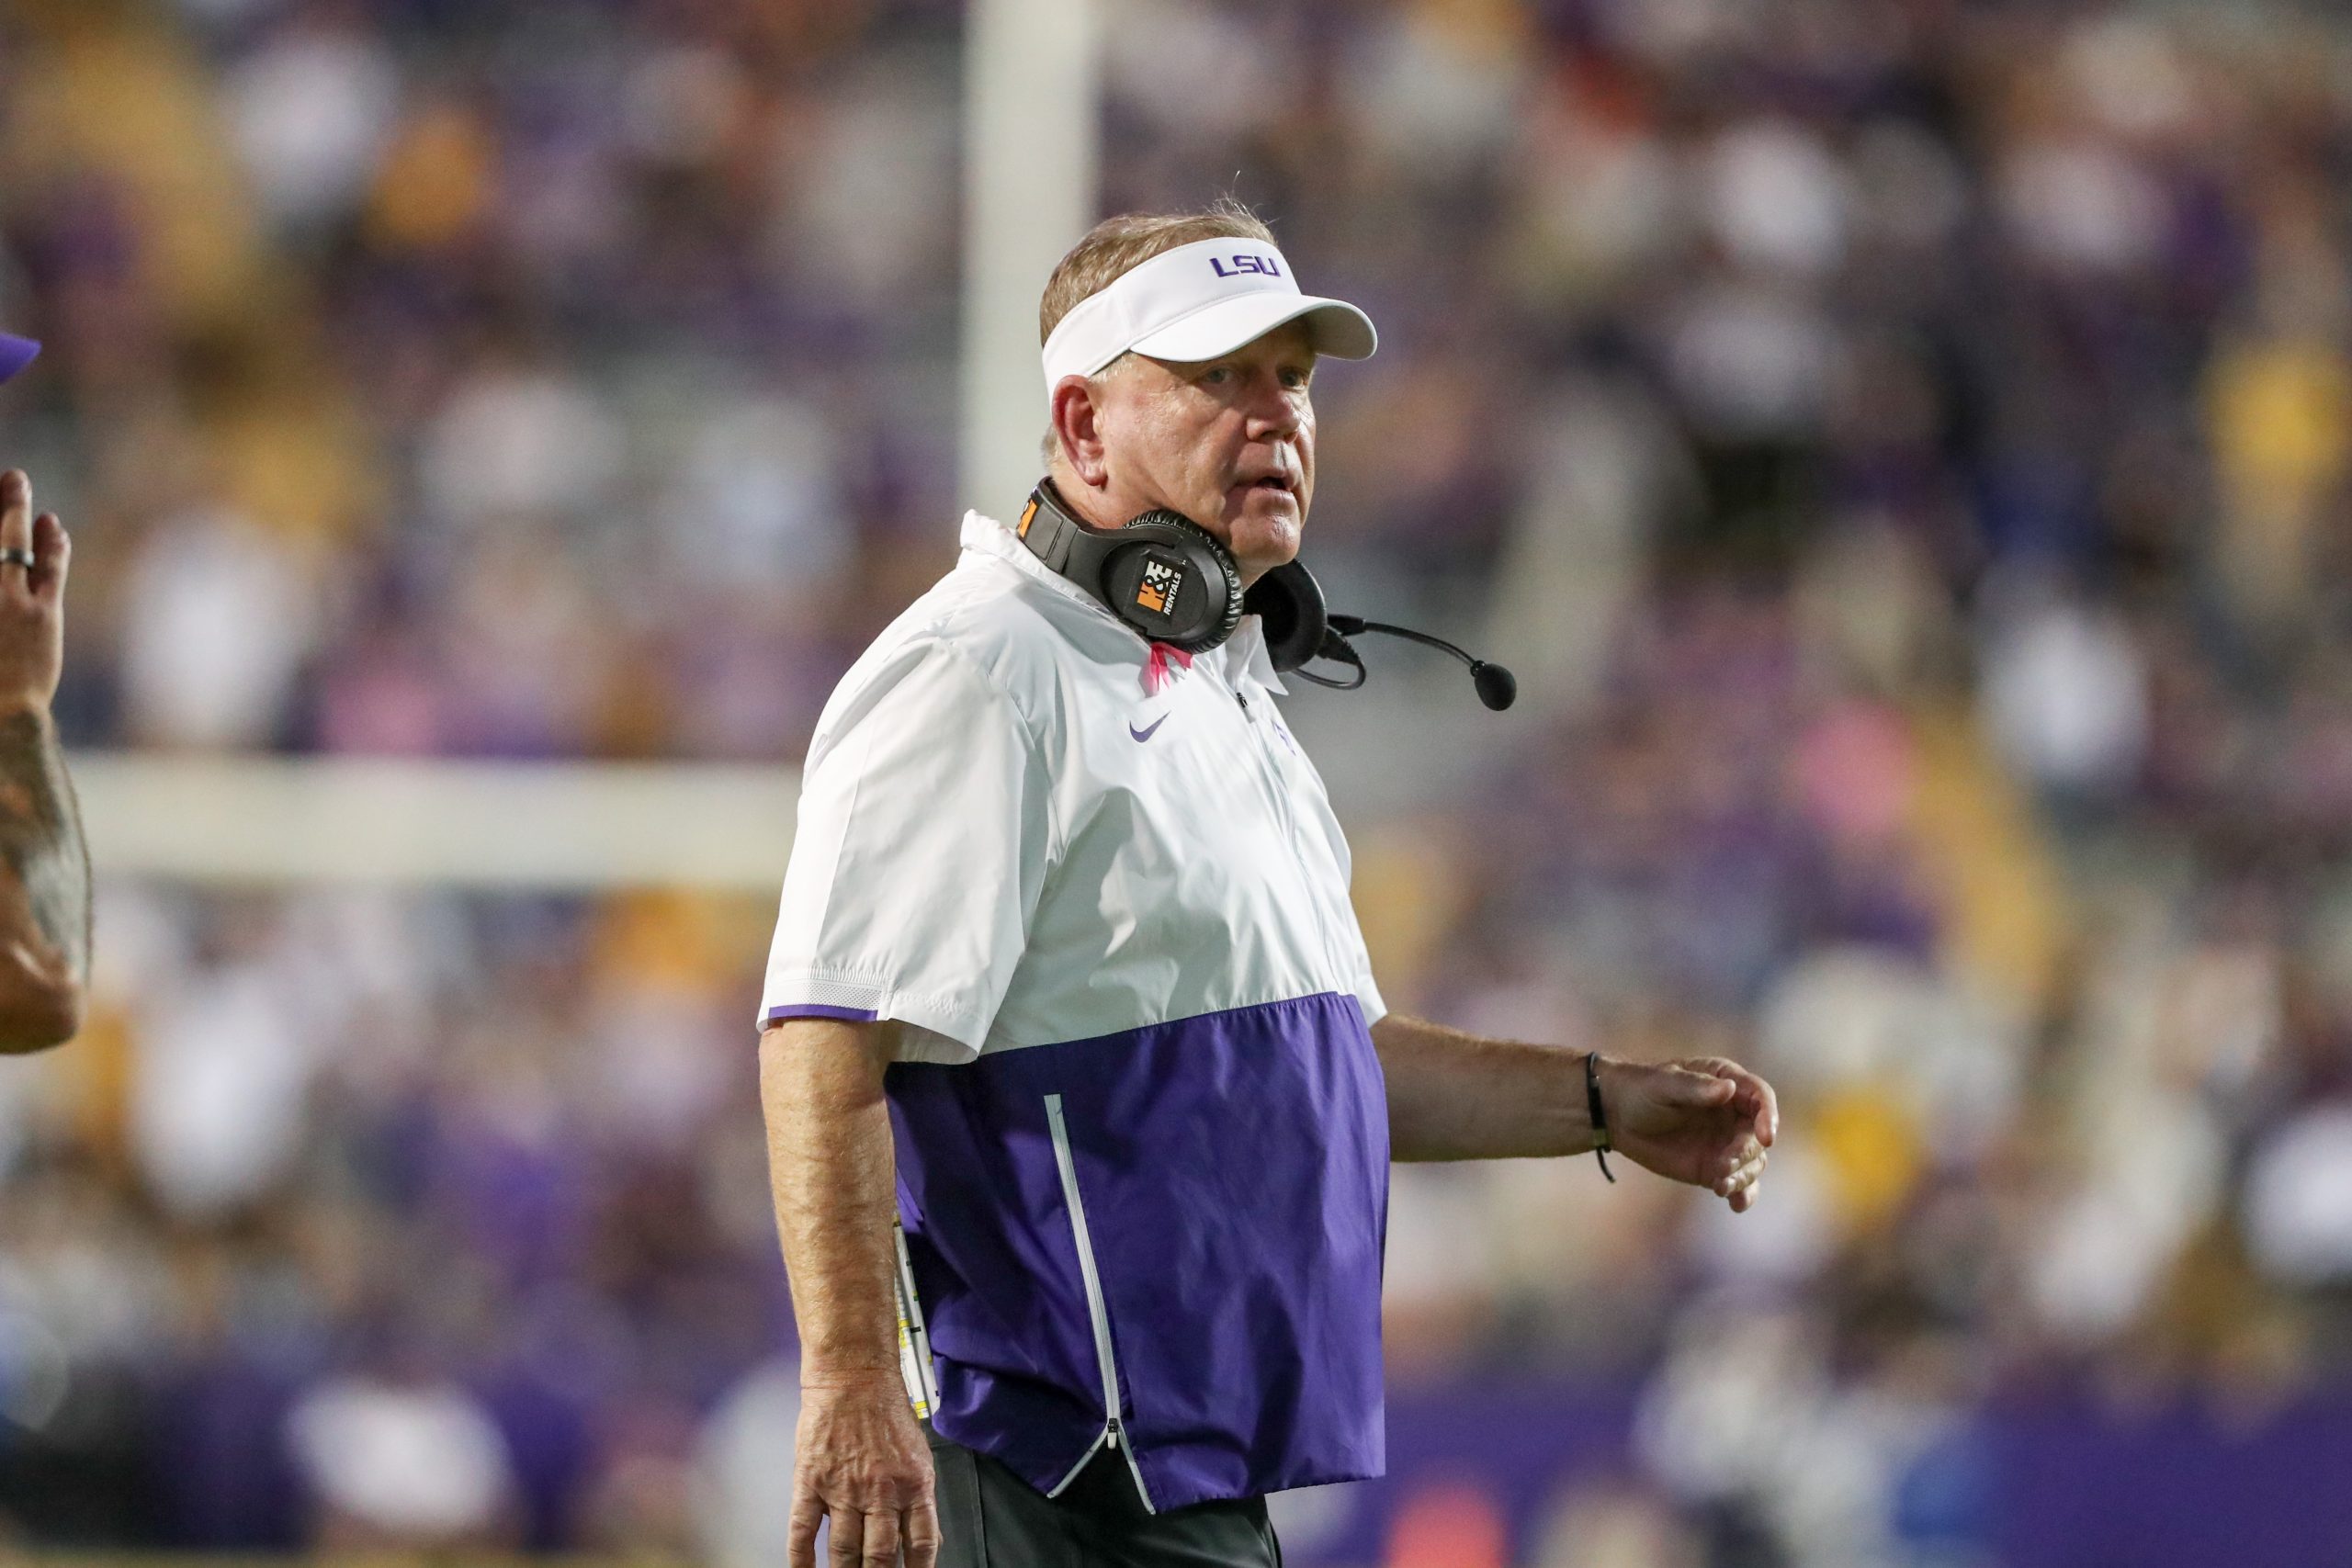 This is where I want to be': LSU coach Brian Kelly vows to finish